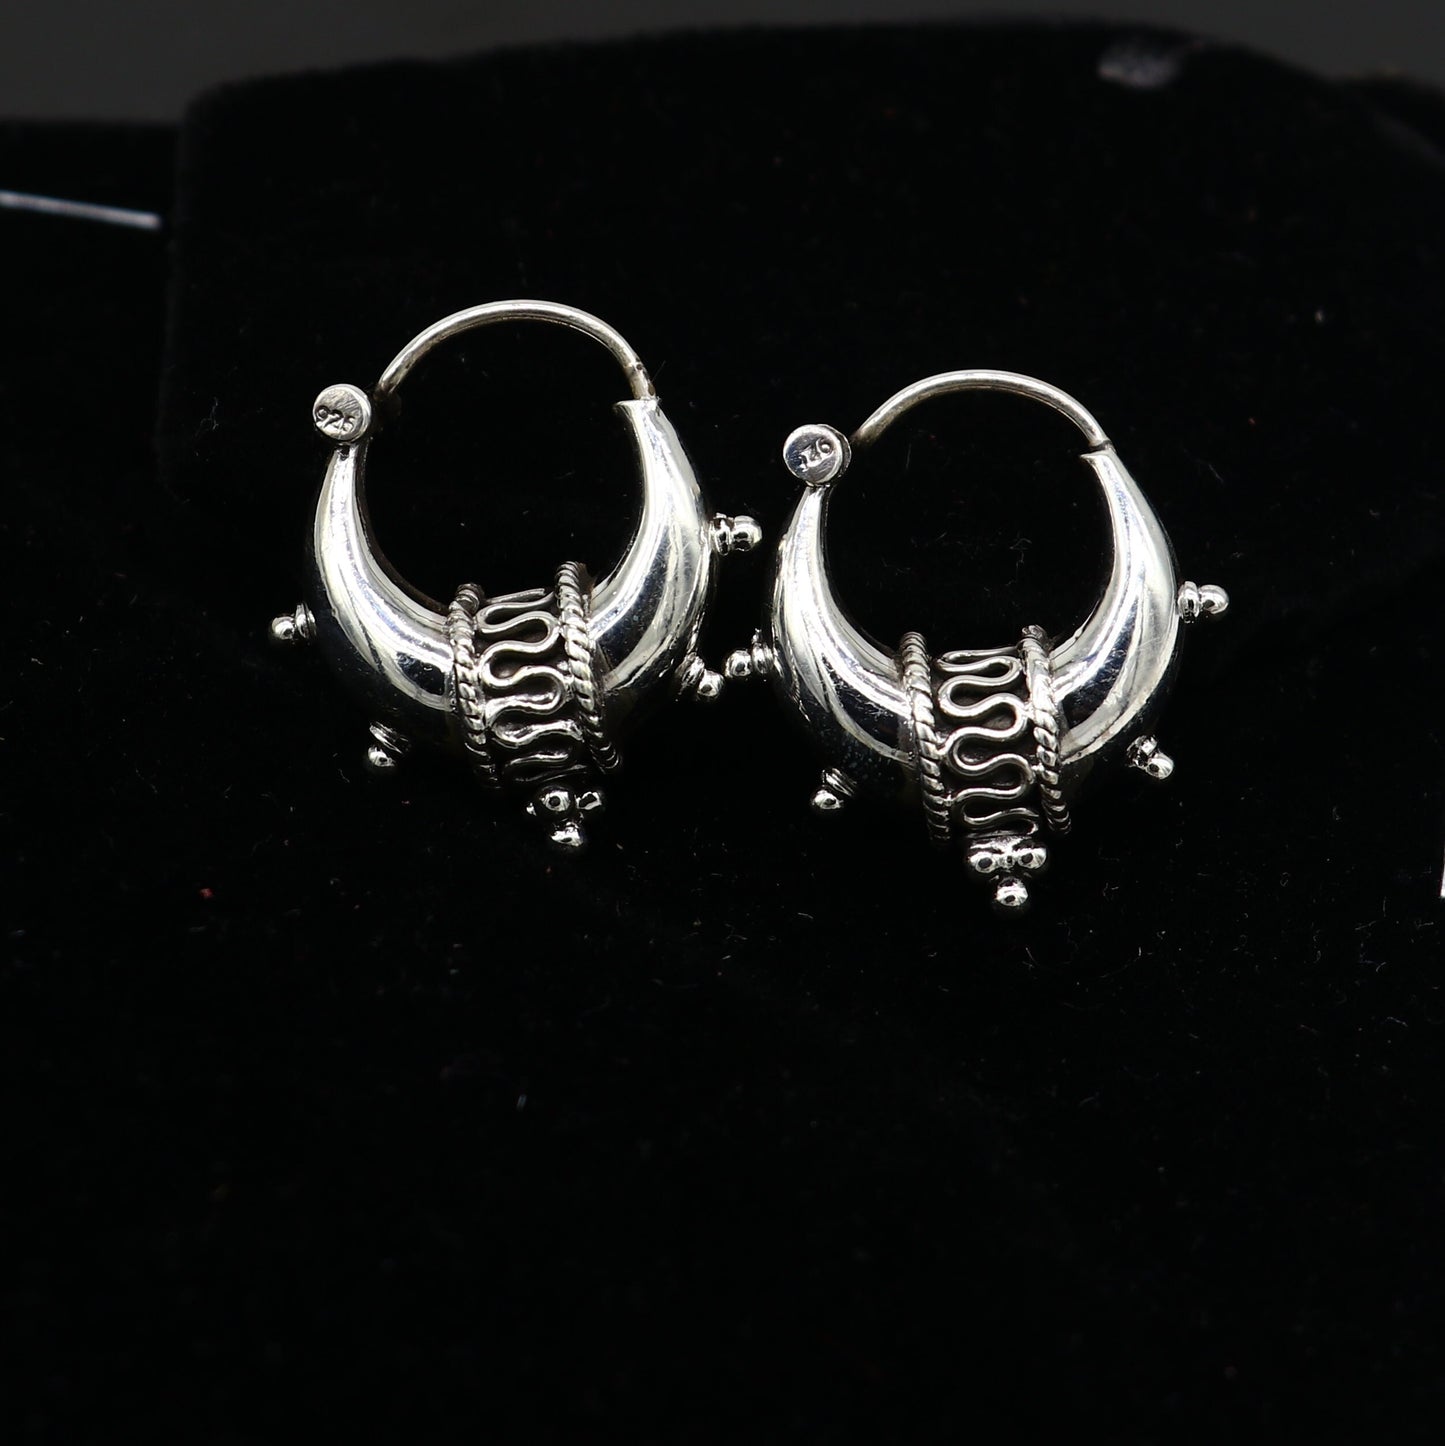 925 sterling silver plain shiny traditional cultural design elegant hoops earrings kundal tribal belly dance brides dainty jewelry s1157 - TRIBAL ORNAMENTS